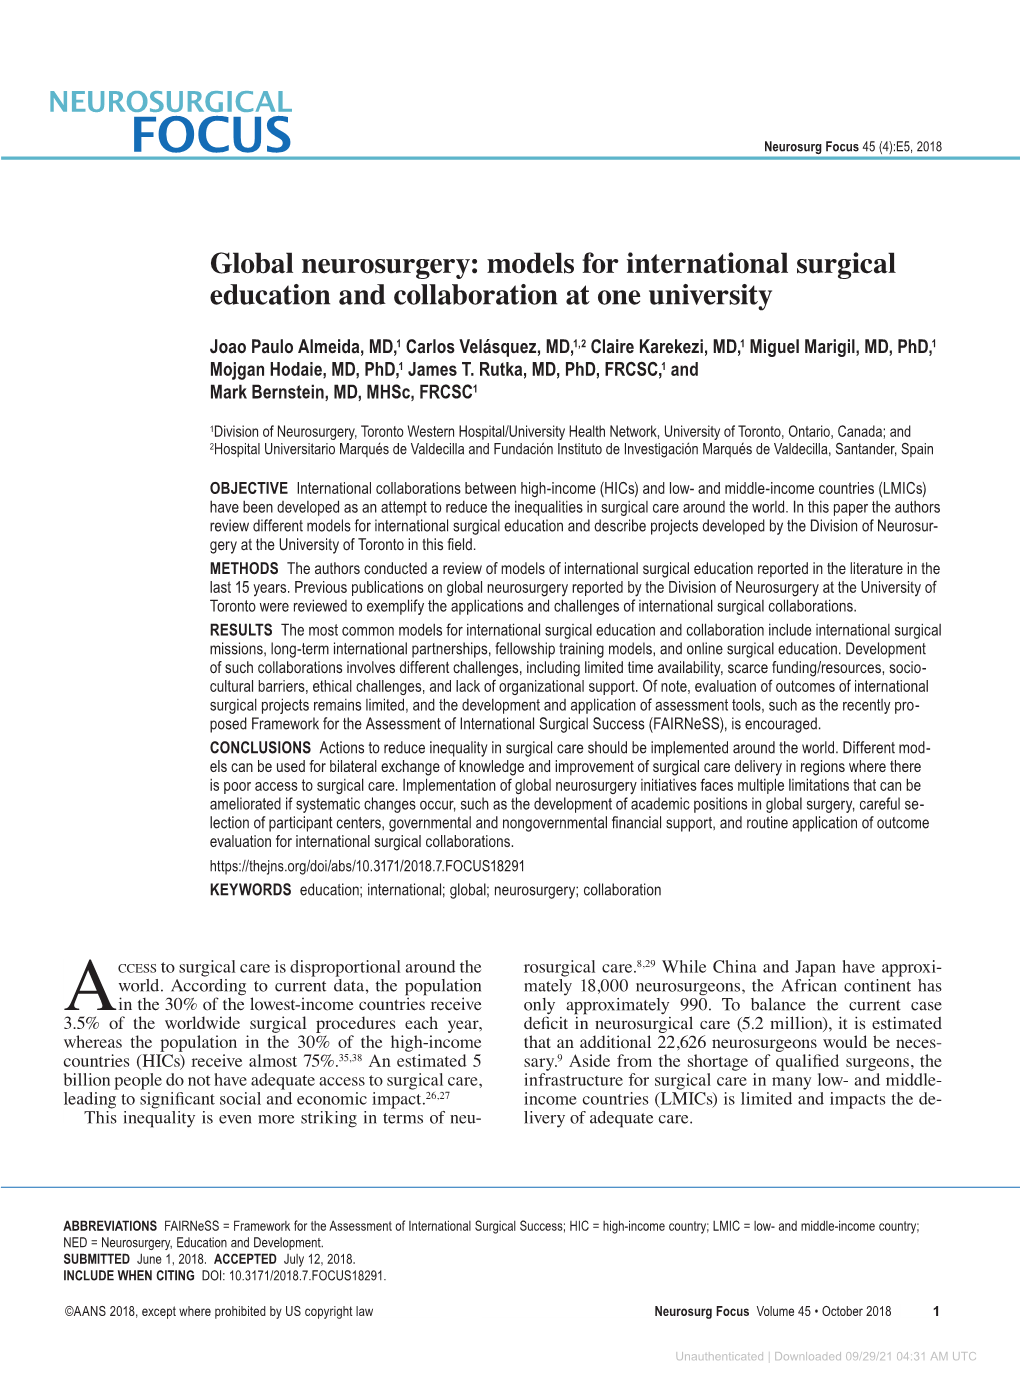 Global Neurosurgery: Models for International Surgical Education and Collaboration at One University